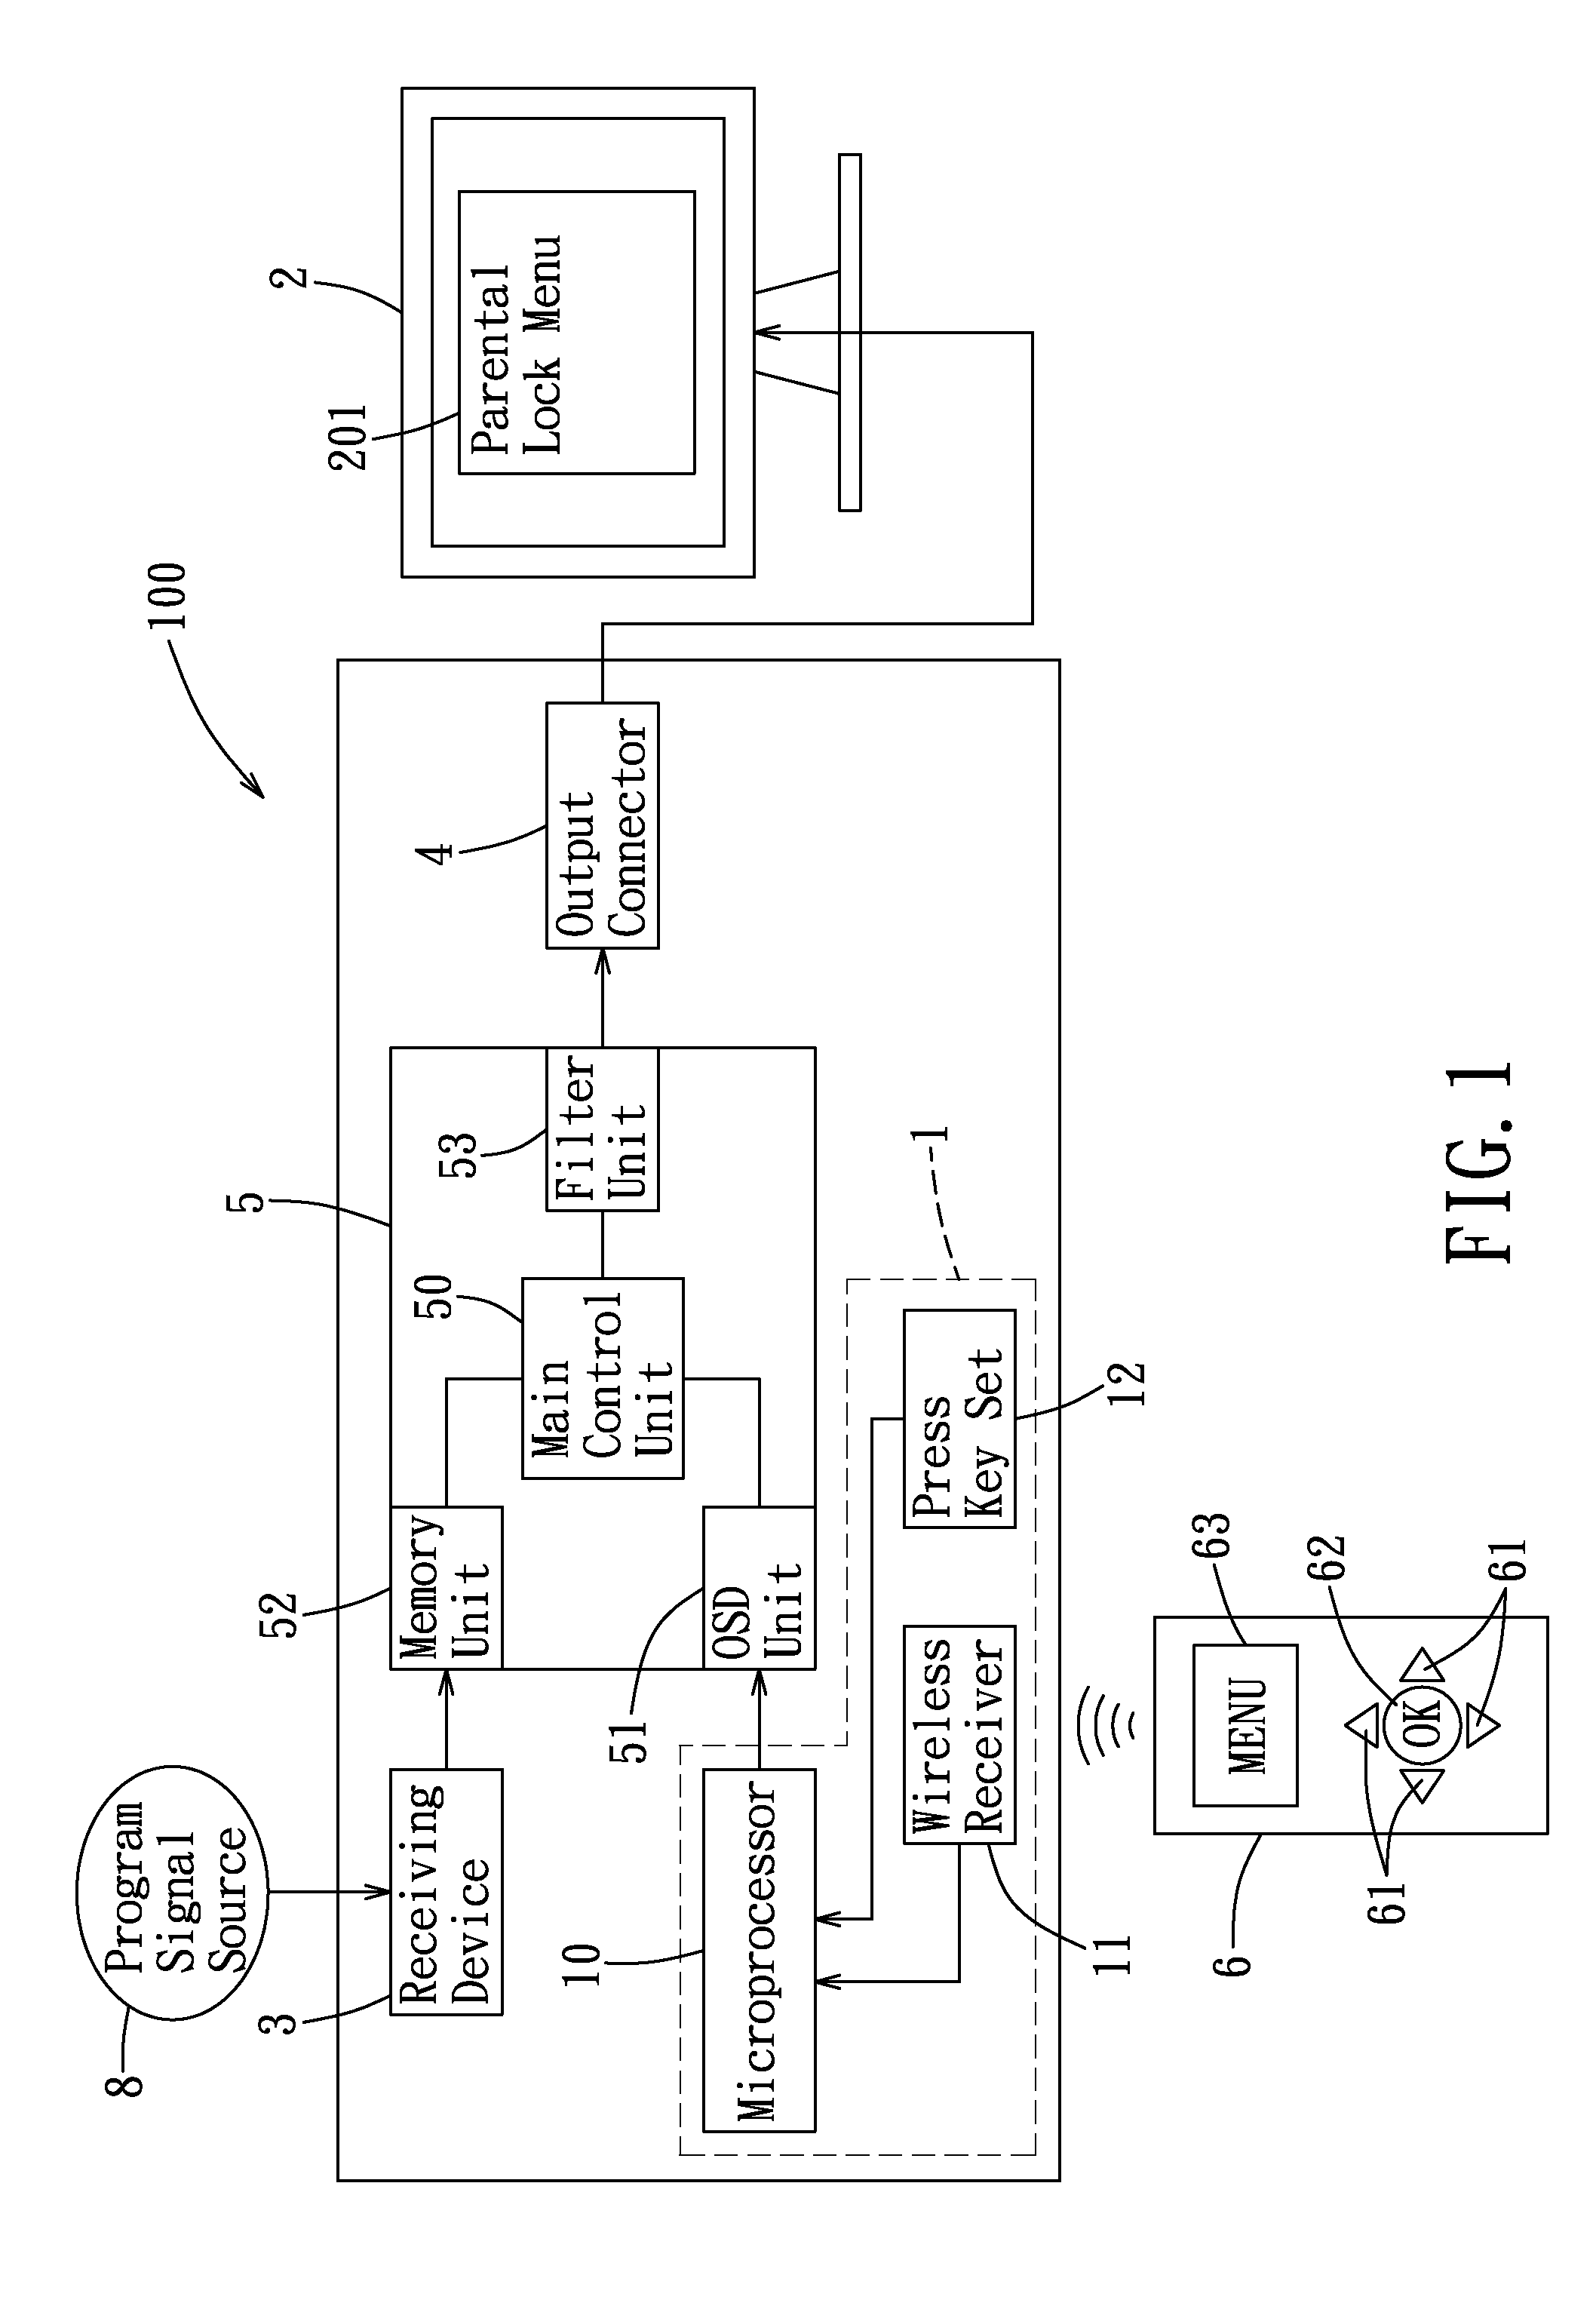 System and method for blocking access to programs using a parental lock menu